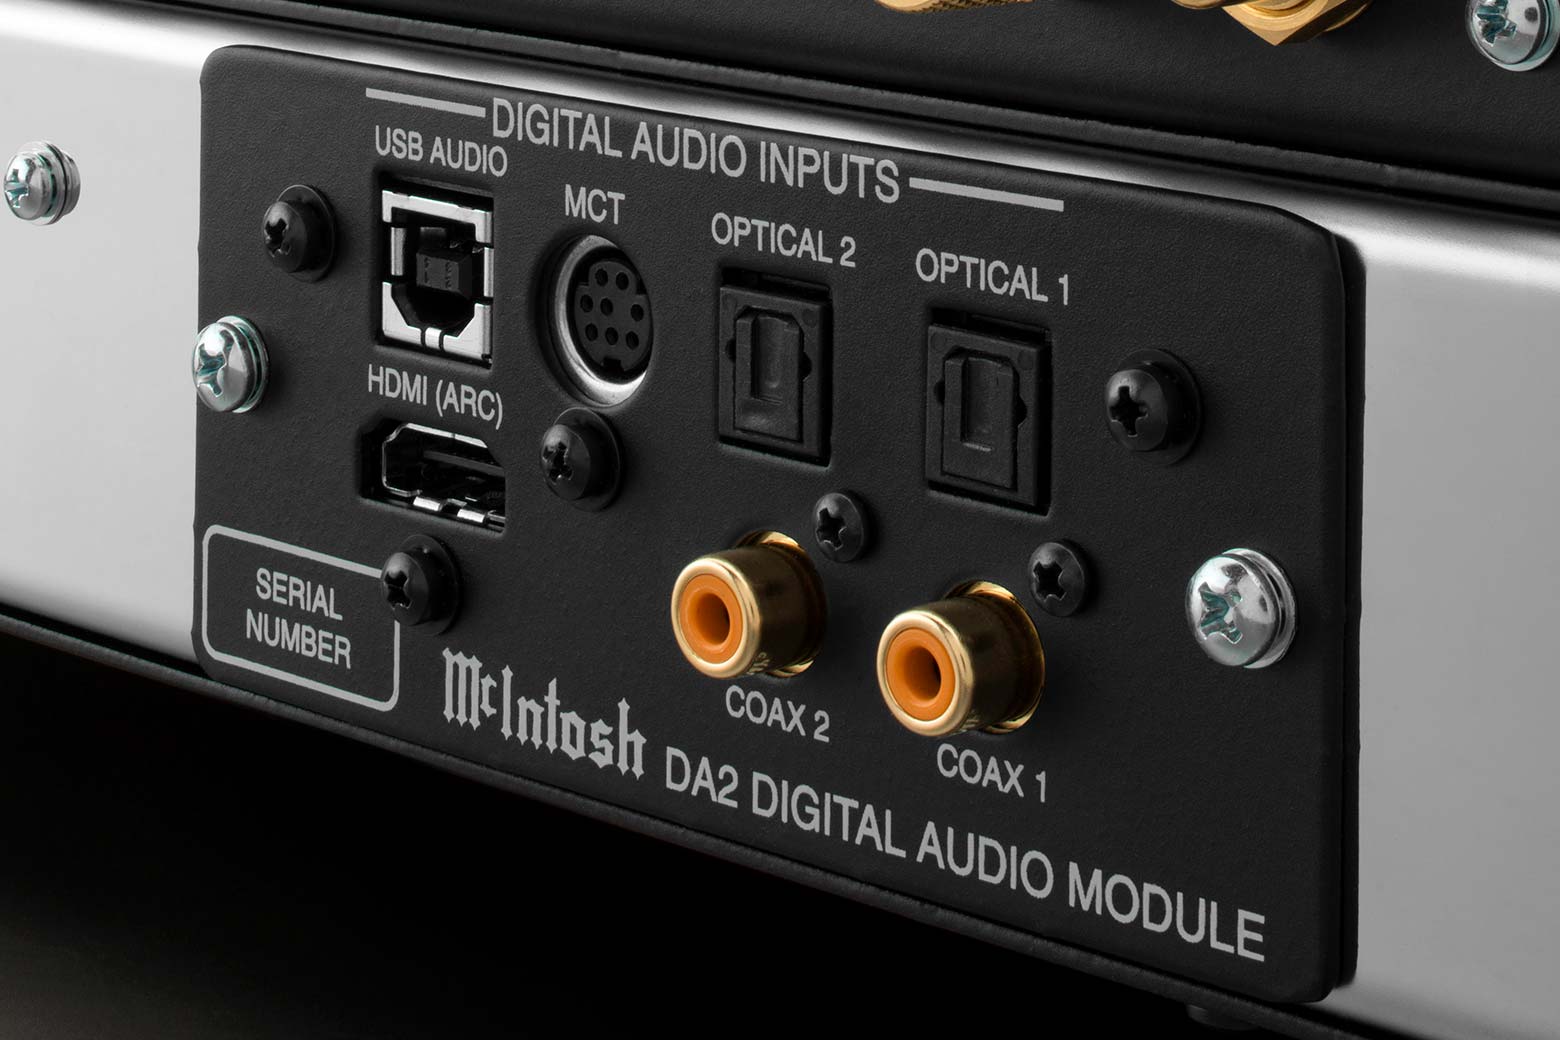 McIntosh DA2 Upgrade Kit (In-Store Purchases Only & USD Pricing)